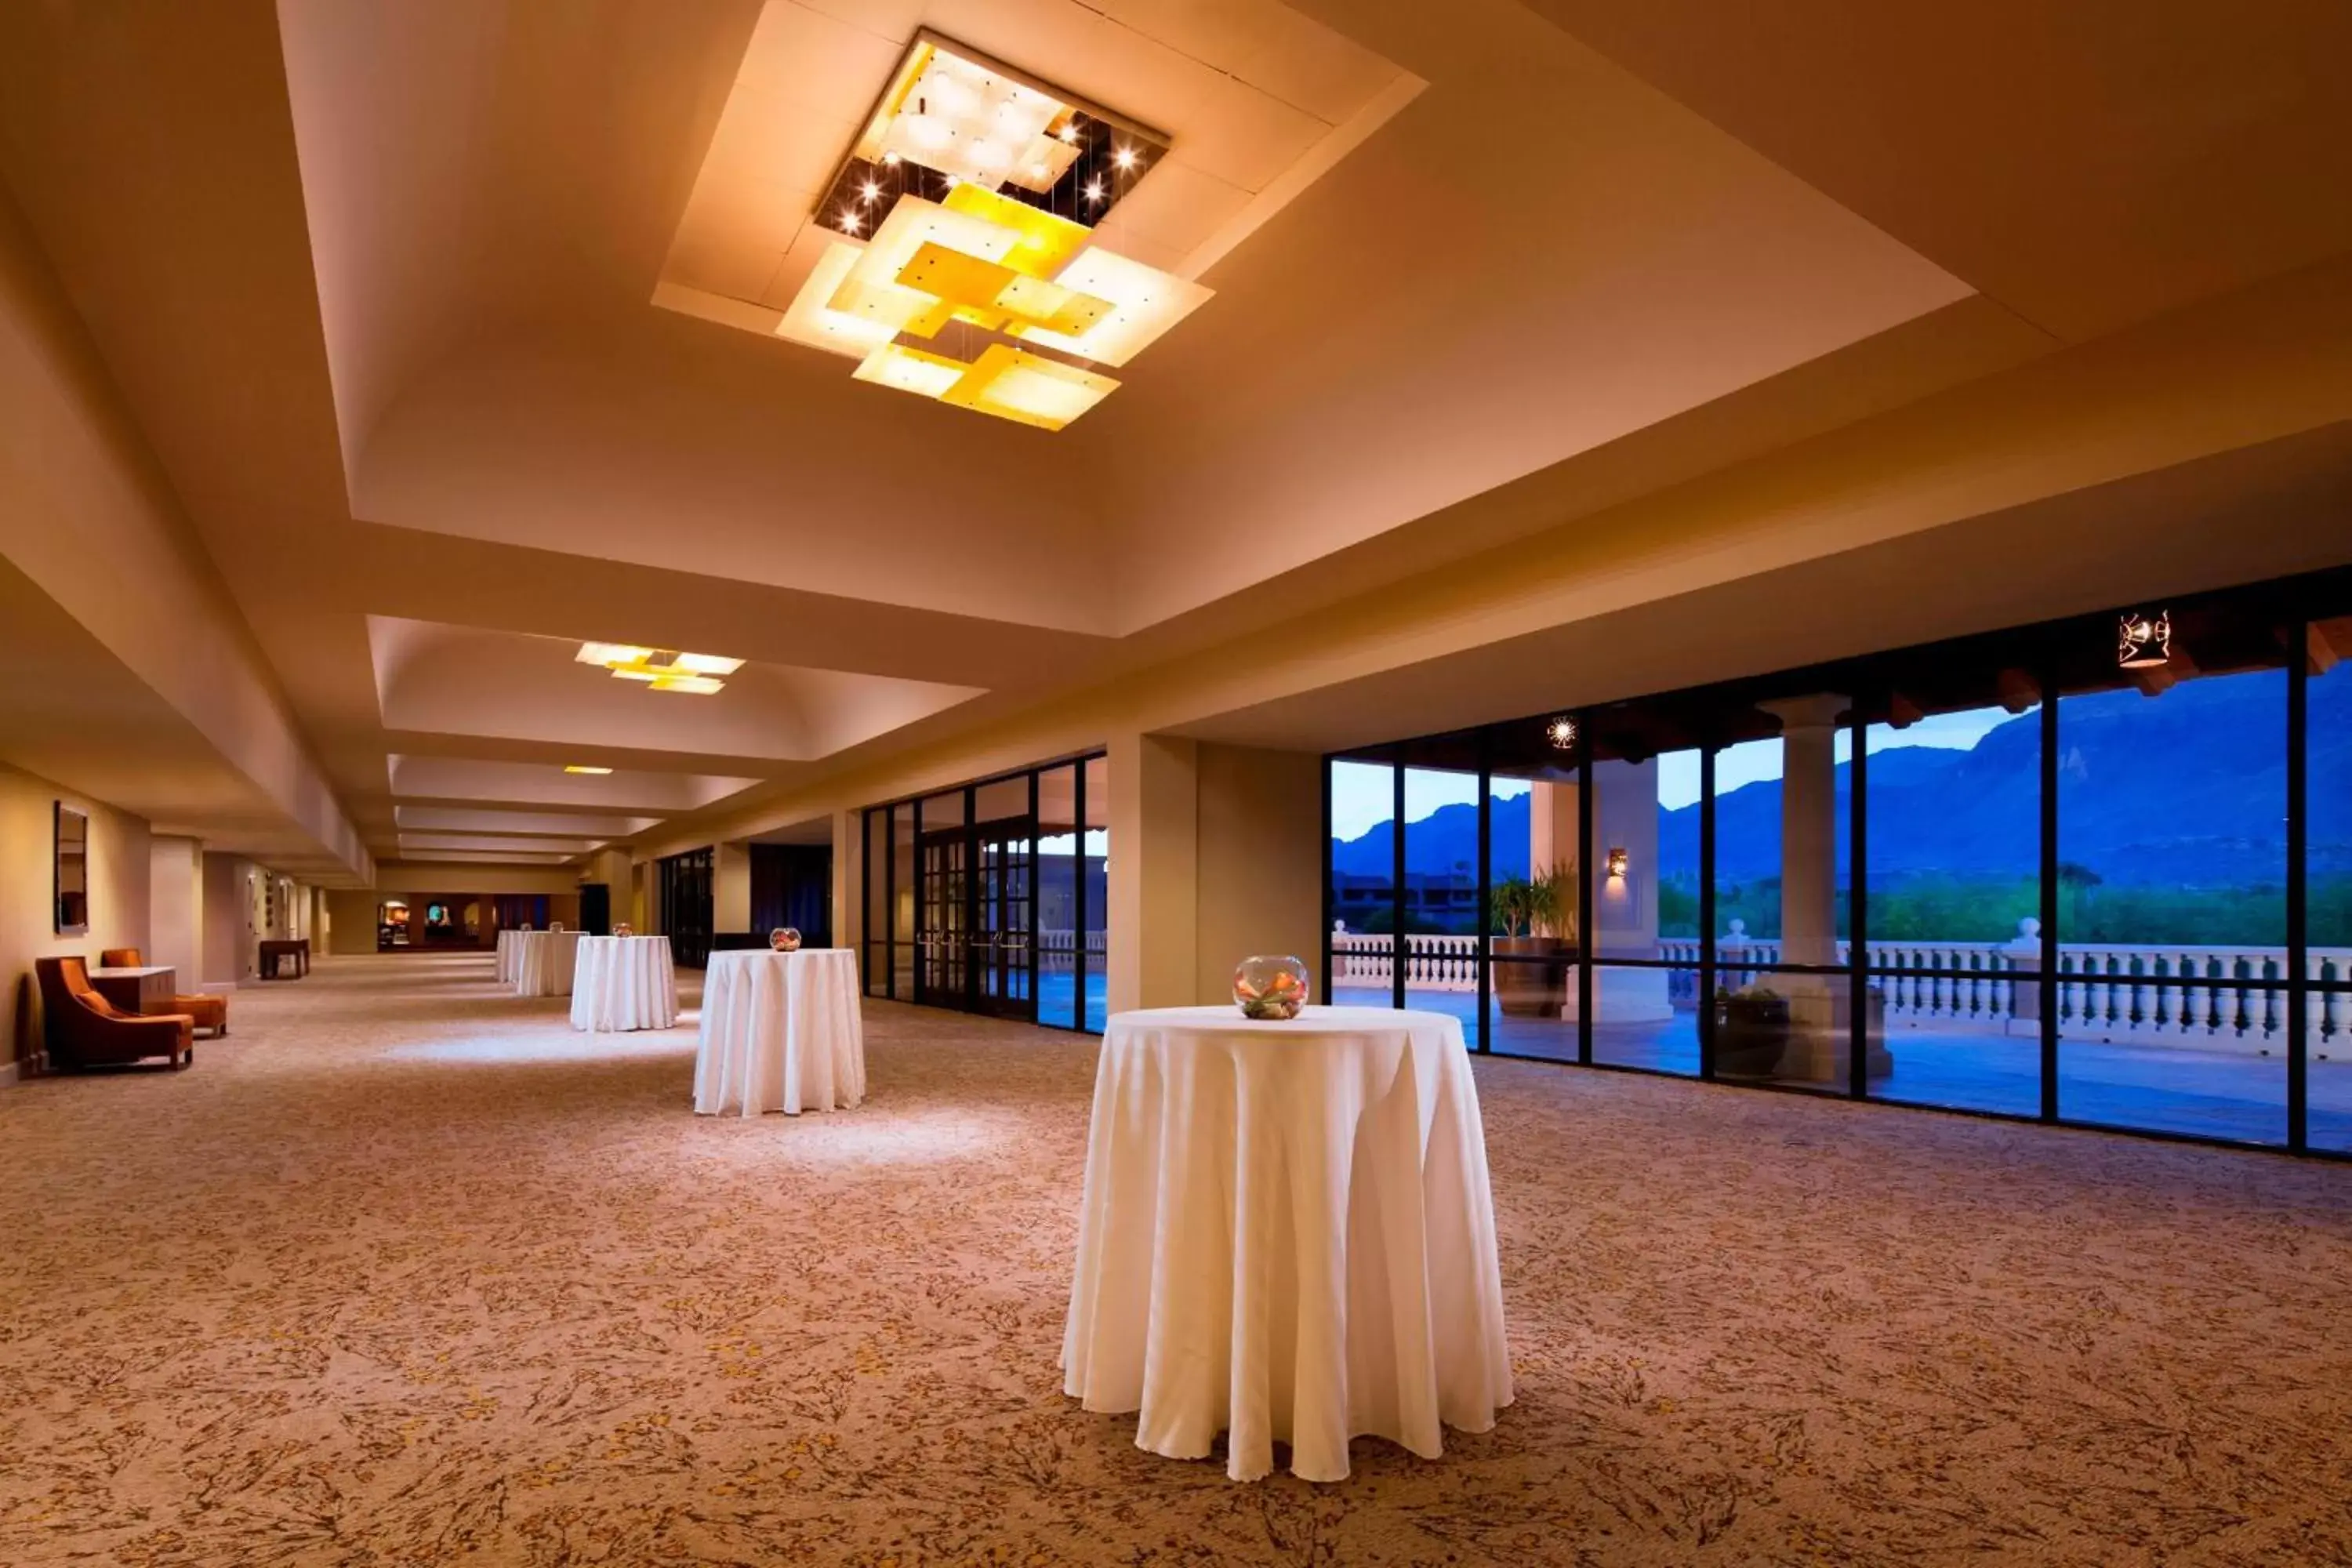 Meeting/conference room, Banquet Facilities in The Westin La Paloma Resort & Spa